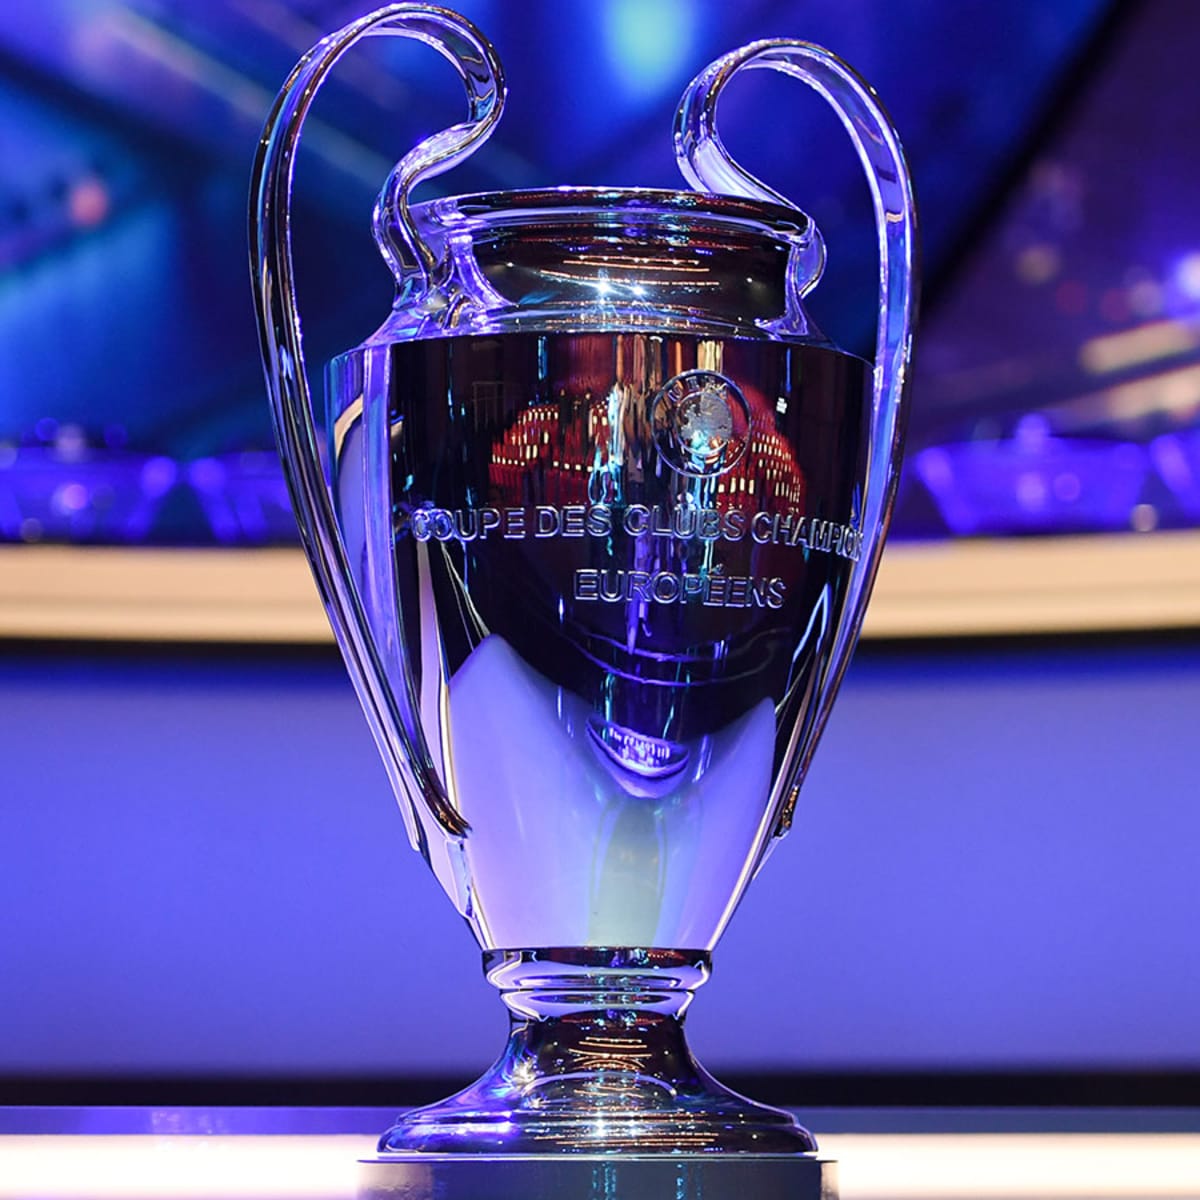 League final be moved from Istanbul - Sports Illustrated